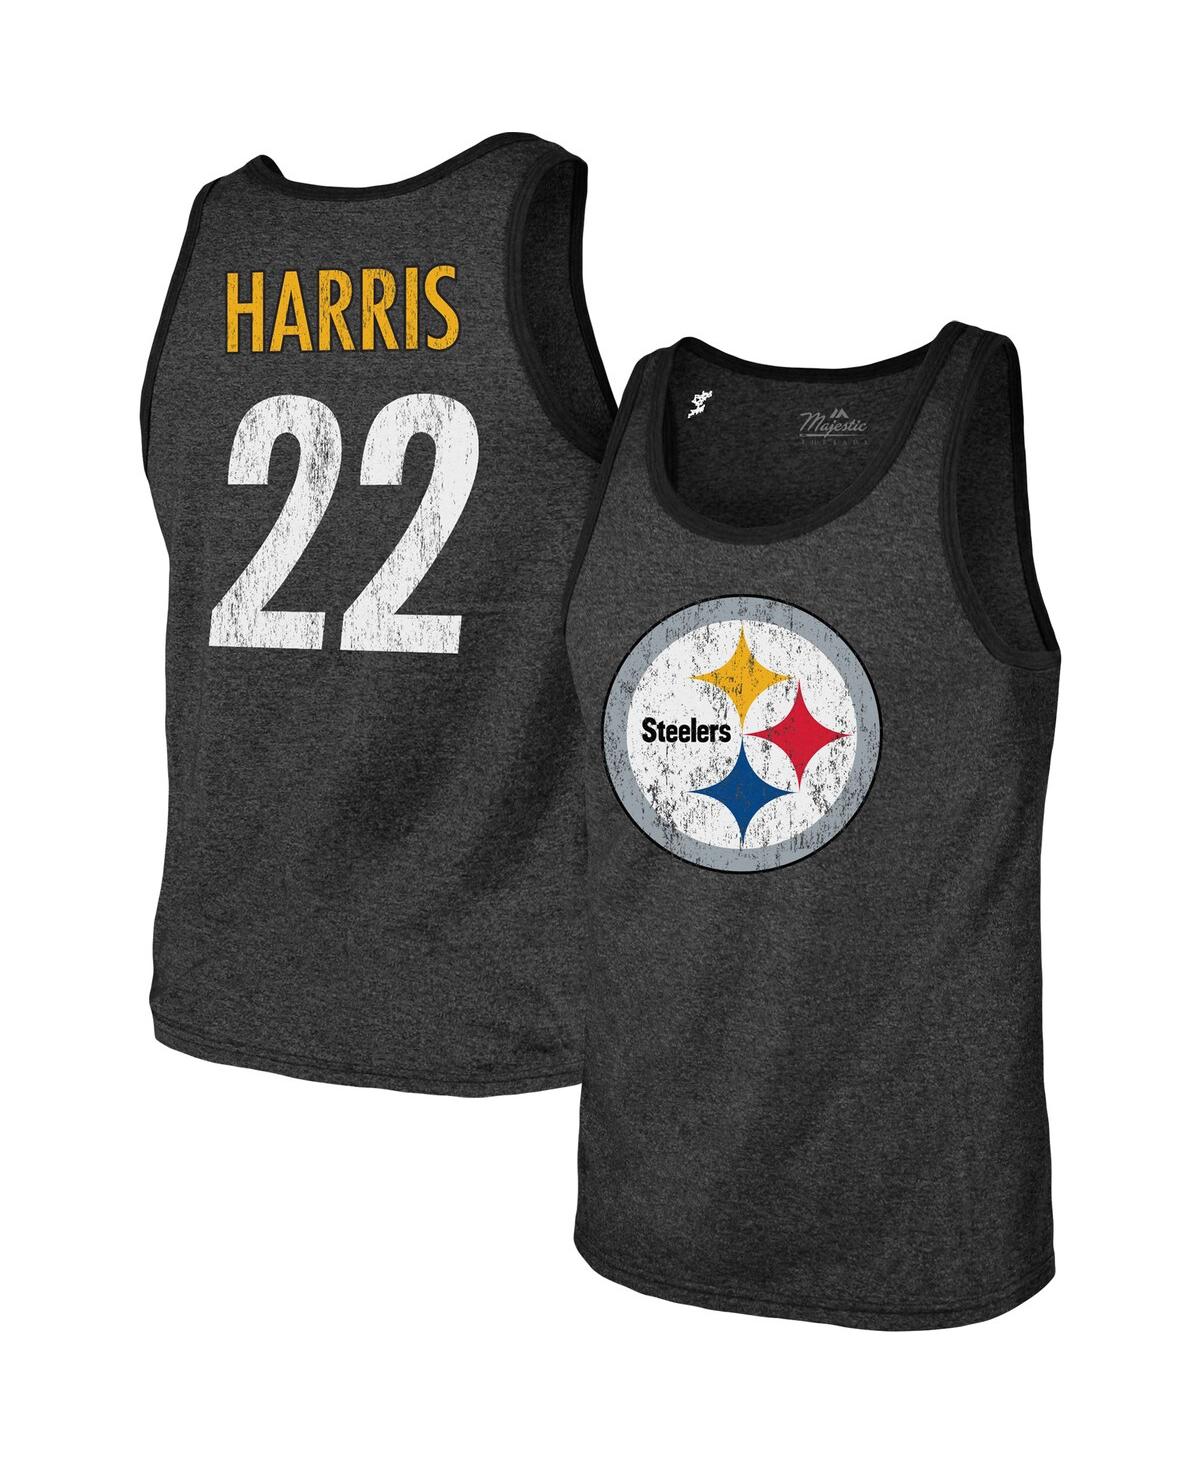 Men's Majestic Threads Najee Harris Heathered Black Pittsburgh Steelers Player Name and Number Tri-Blend Tank Top - Heathered Black